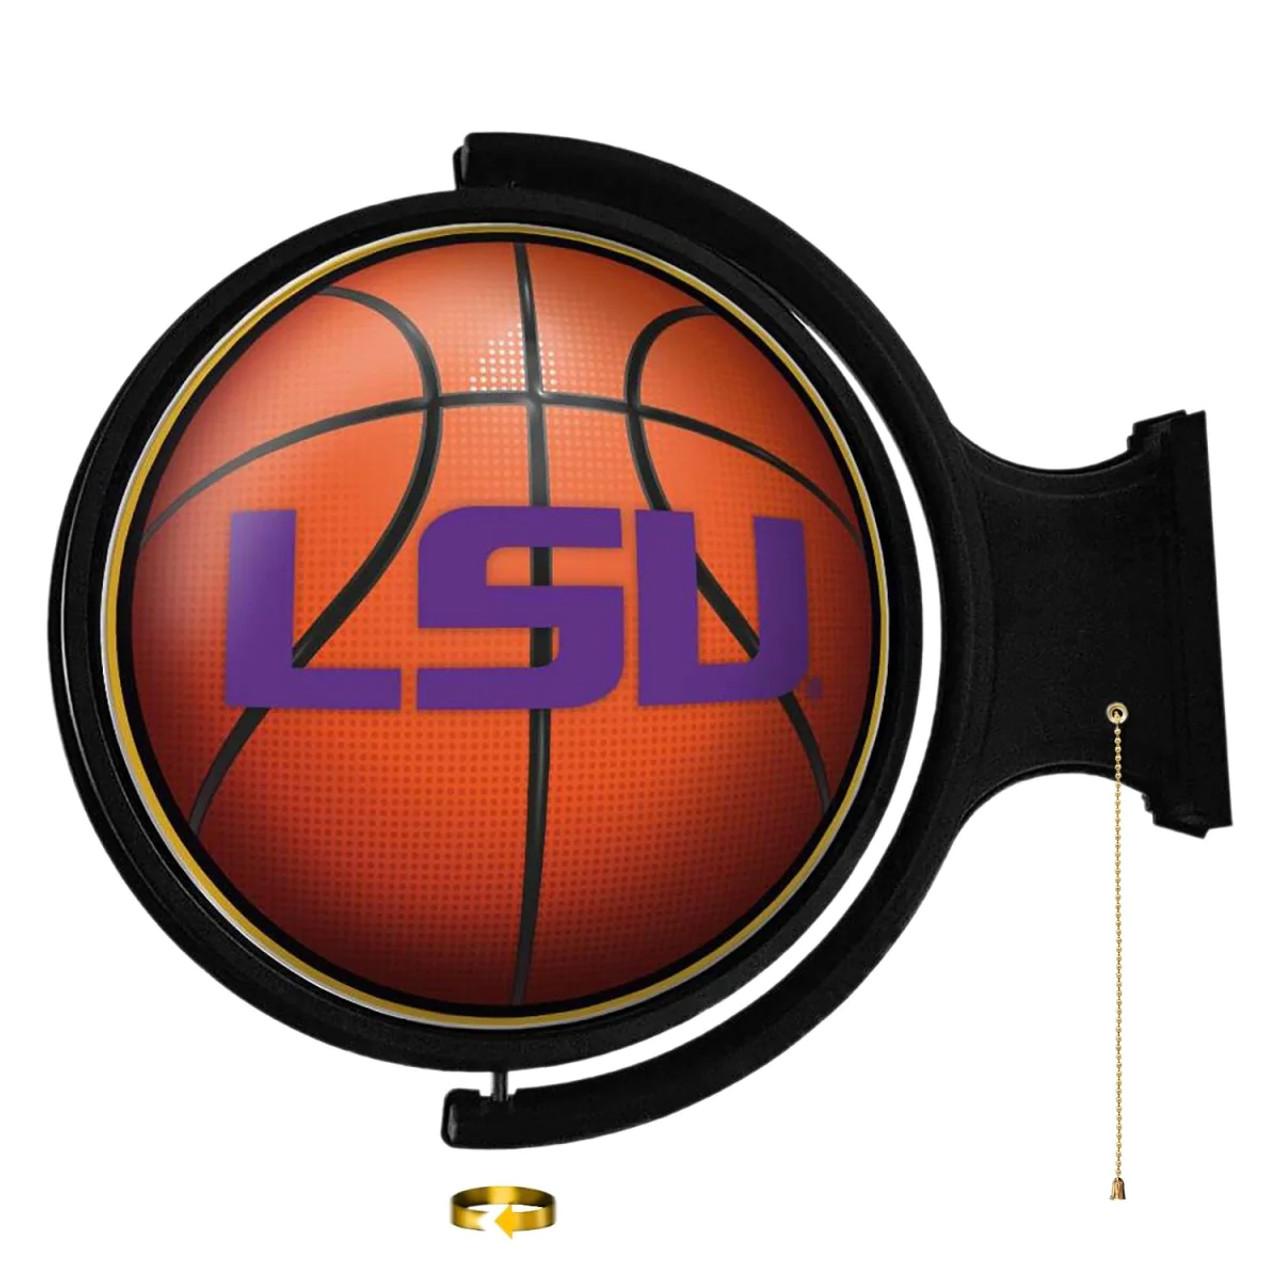 LSU, Louisiana, State, St, Tigers, BB, Basketball, Spinning, Rotating Lighted, Wall, Sign, NCAA, The Fan Brand, NCLSUT-115-11, 697842109185